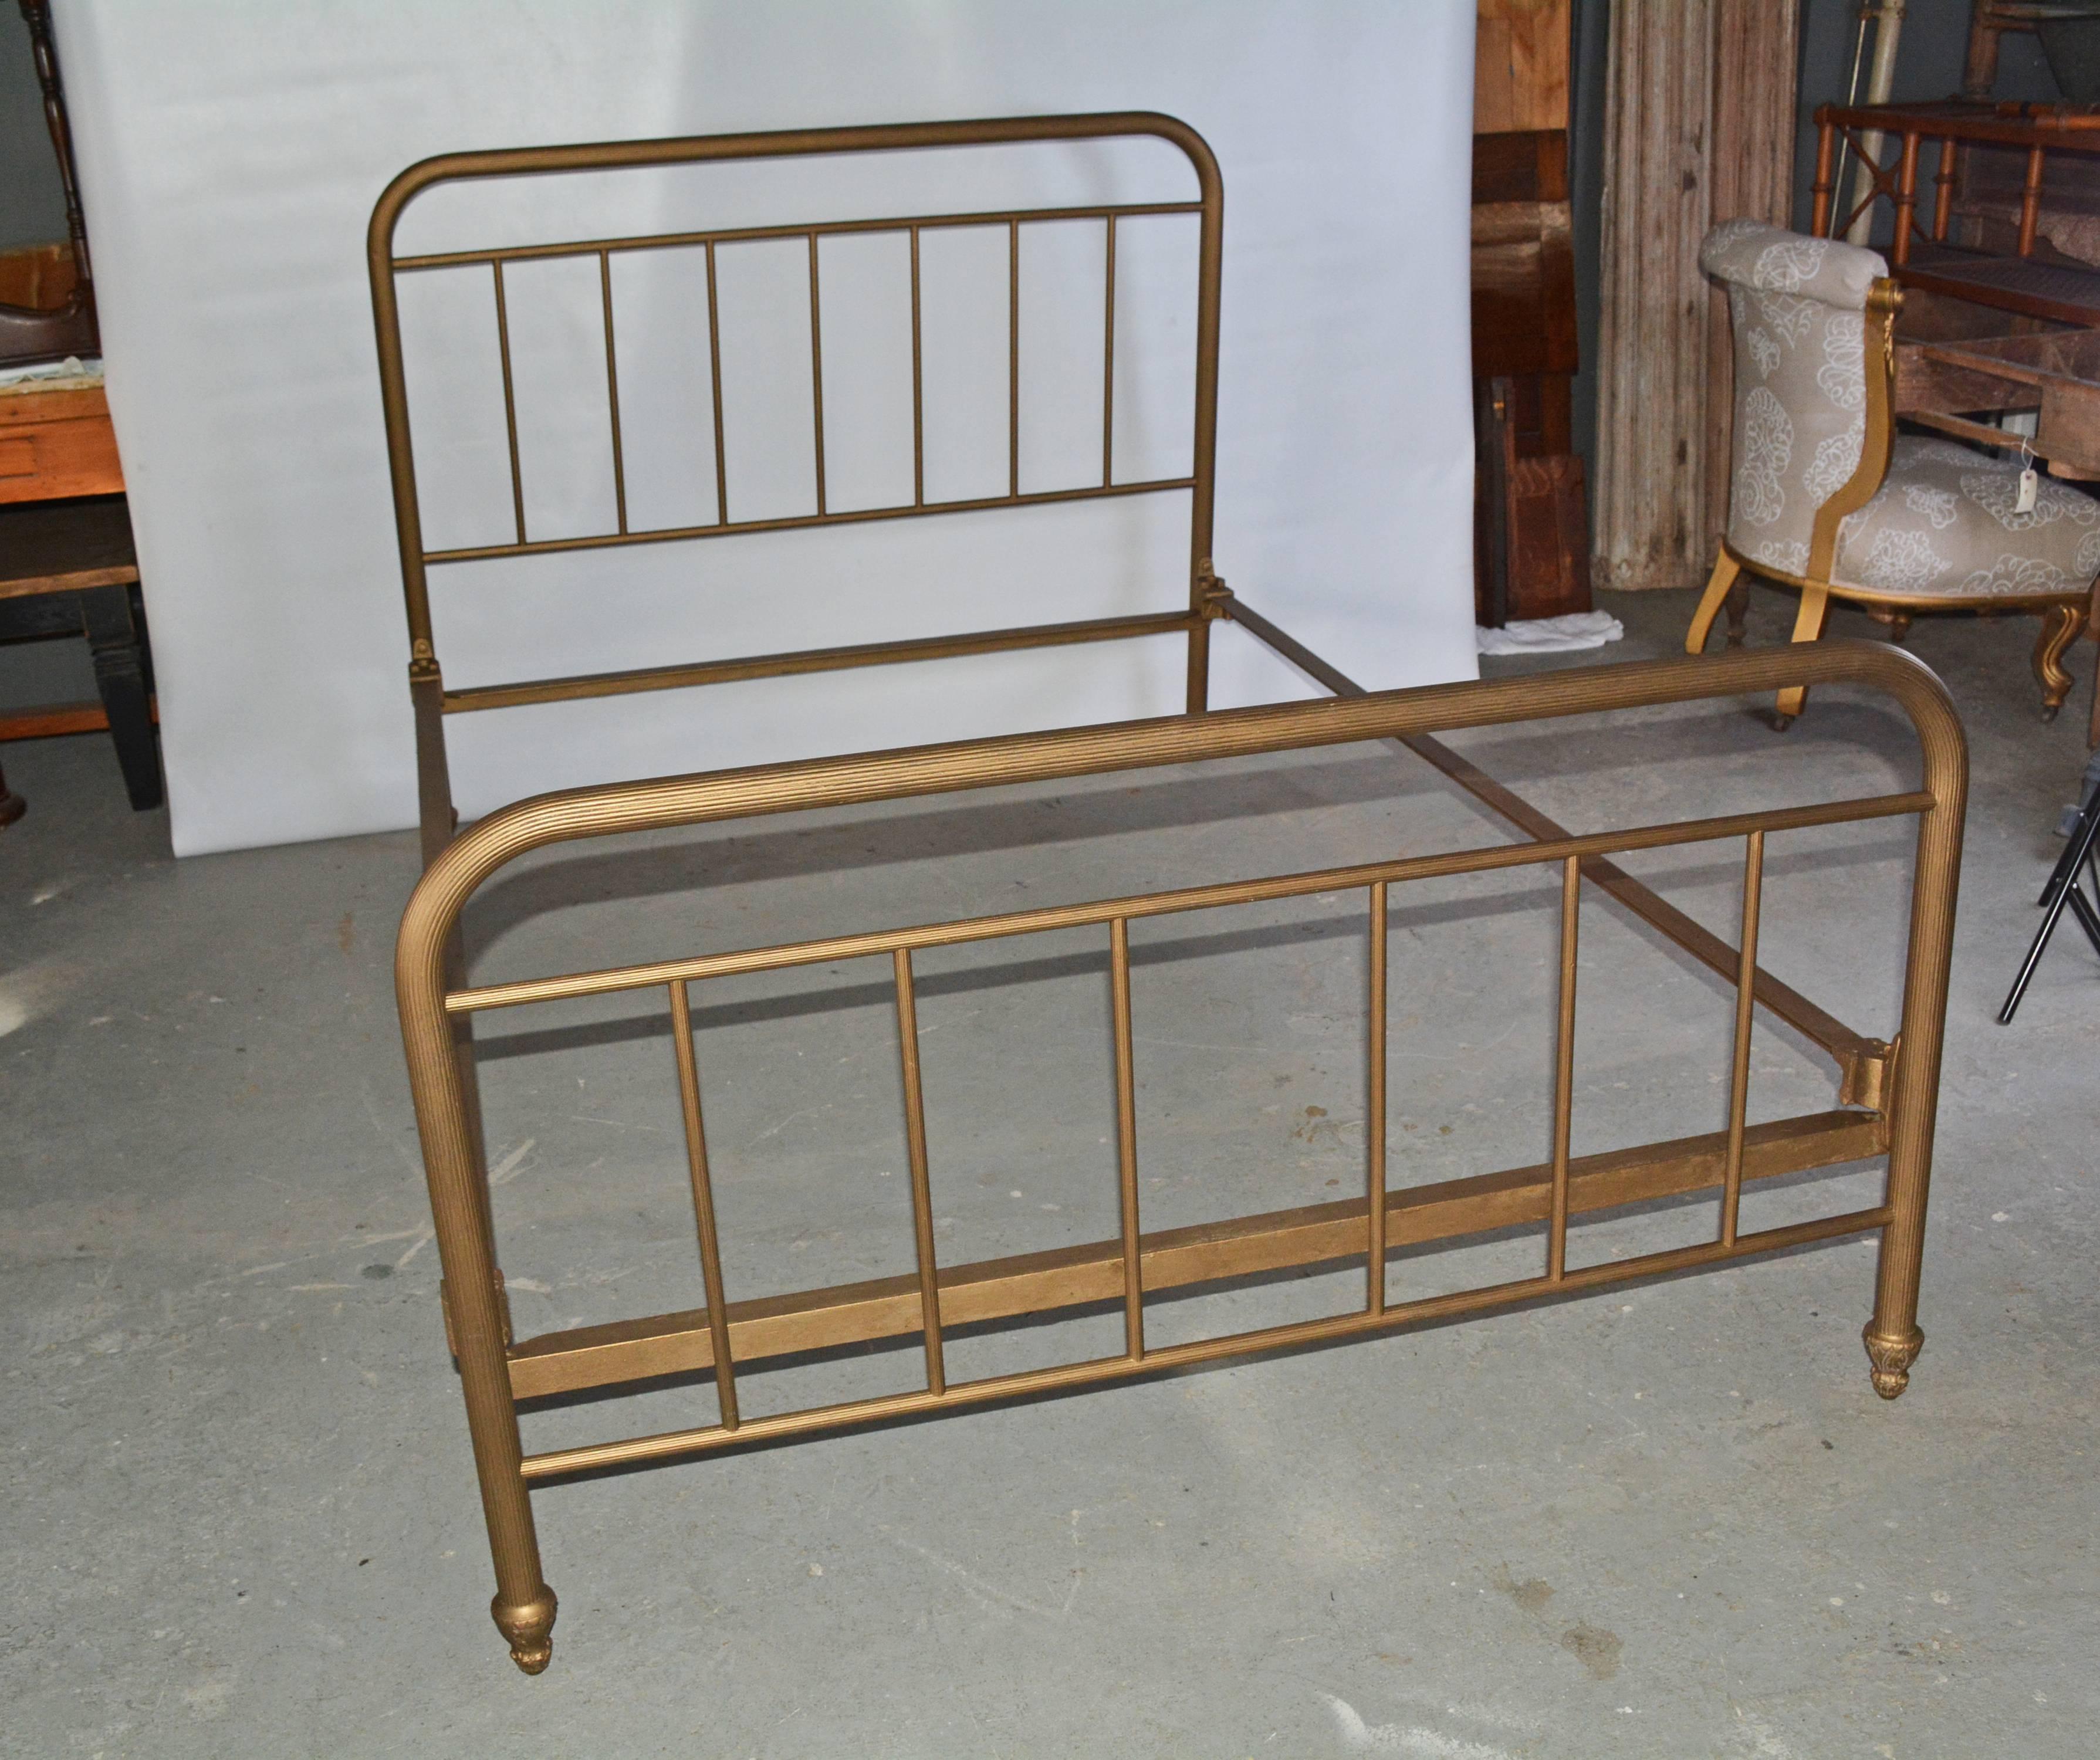 The simplicity of this Victorian gold painted full size double bed will blend with any contemporary decor. The side railings slide into sockets attached to the head and foot railings. The framing is actually tubing which makes for a lighter weight